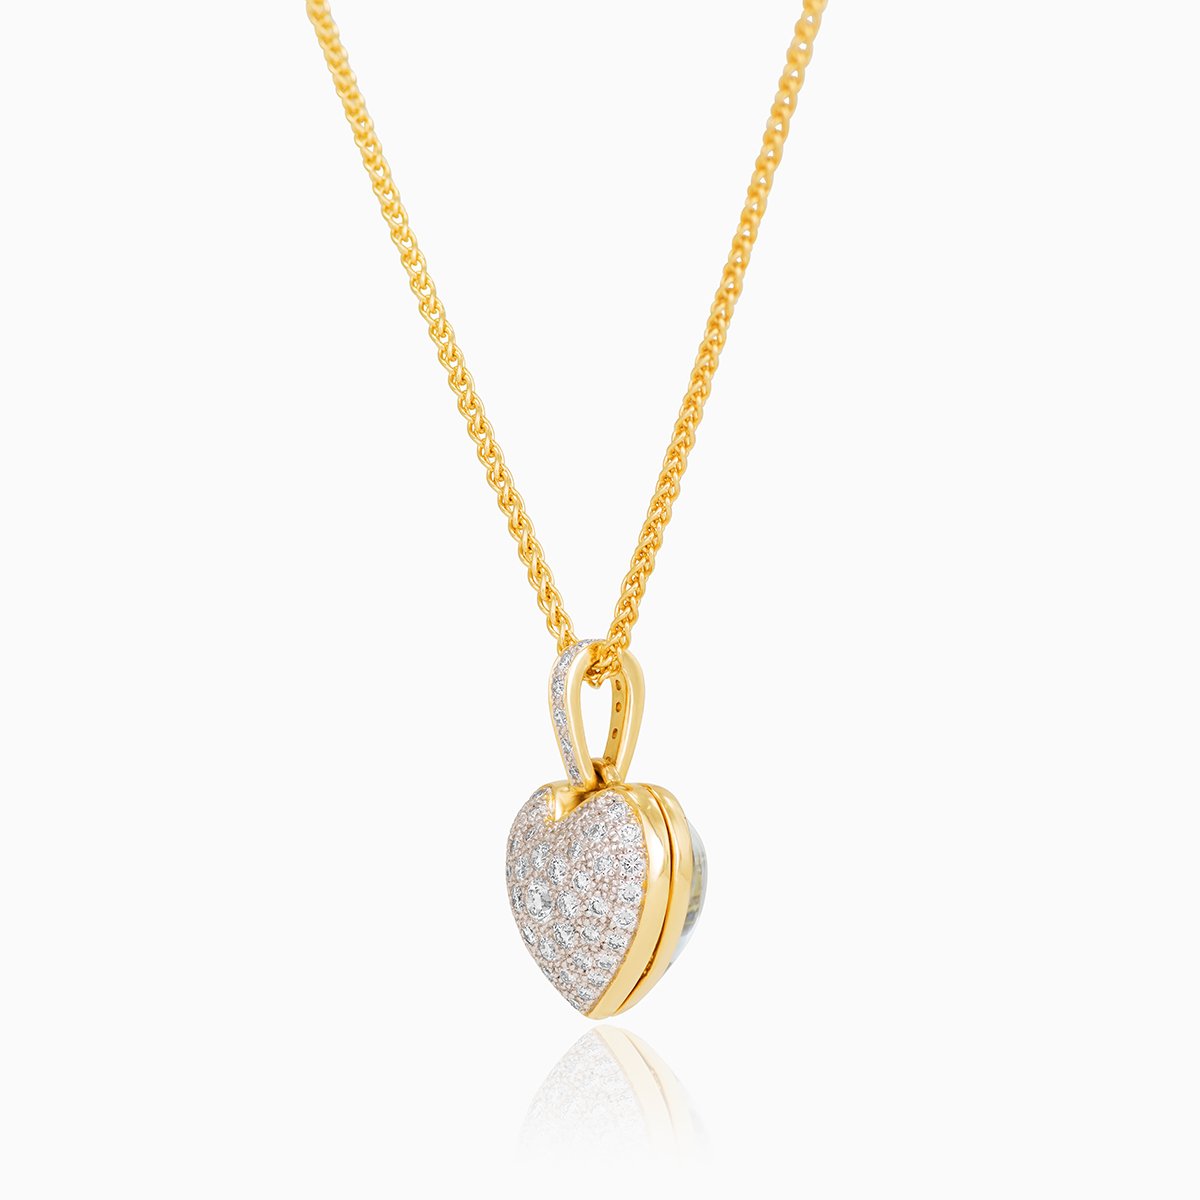 Side view of a petite reversible 18 ct gold heart locket set with aquamarine one one side and diamonds on the other side, on an 18 ct gold chain